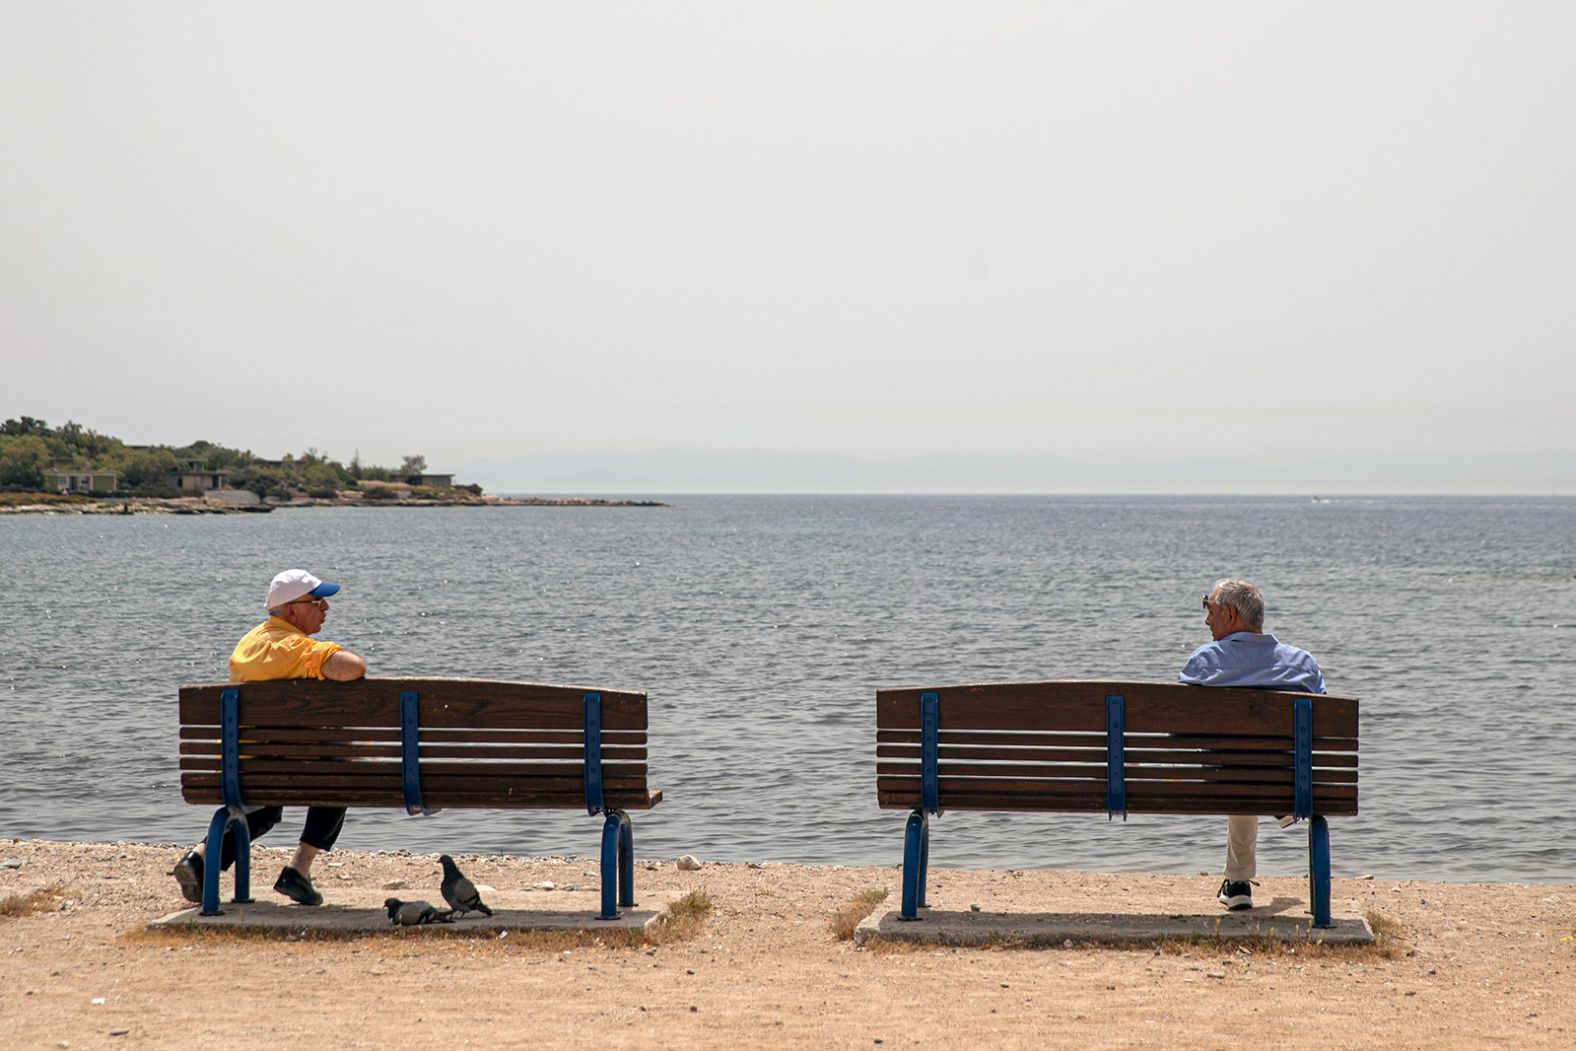 Men maintain their distance from each other while speaking in Glyfada, Greece, on May 15.